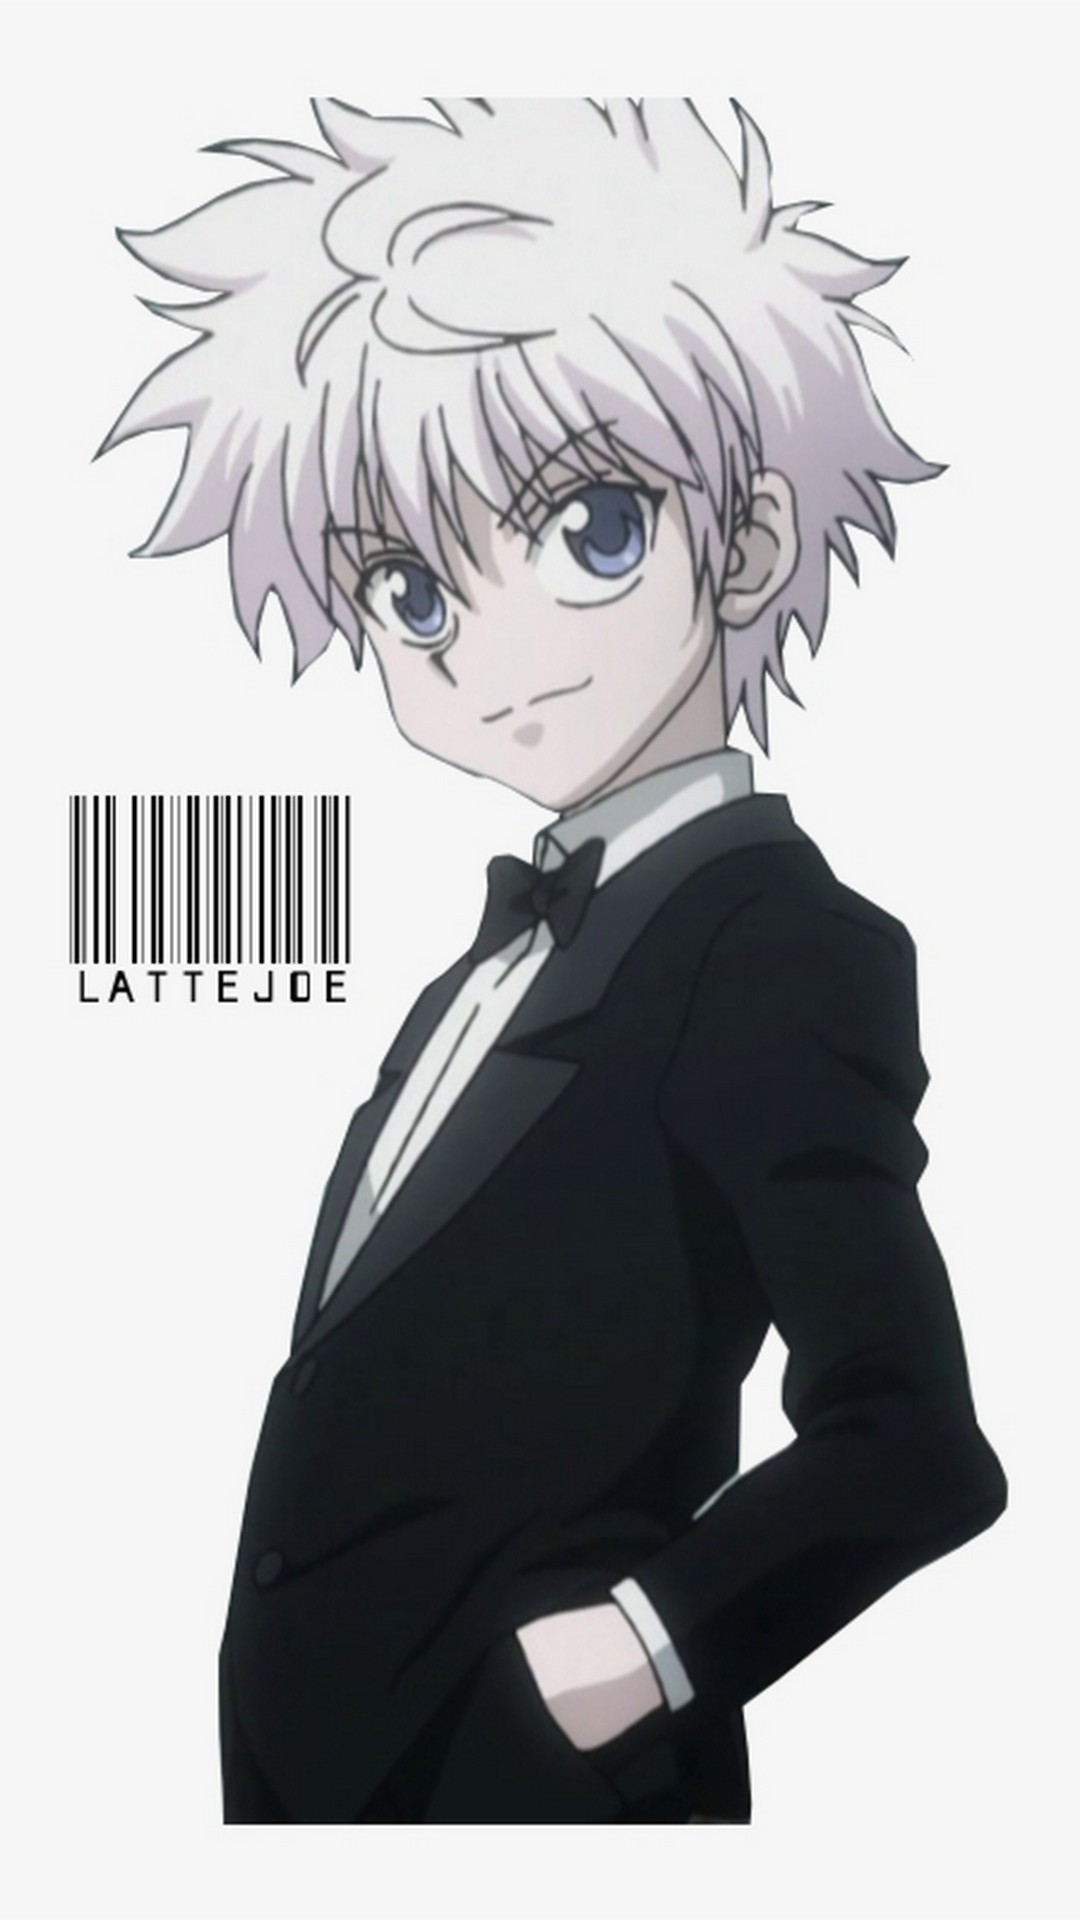 Killua iPhone X Wallpaper HD with high-resolution 1080x1920 pixel. Download all Mobile Wallpapers and Use them as wallpapers for your iPhone, Tablet, iPad, Android and other mobile devices